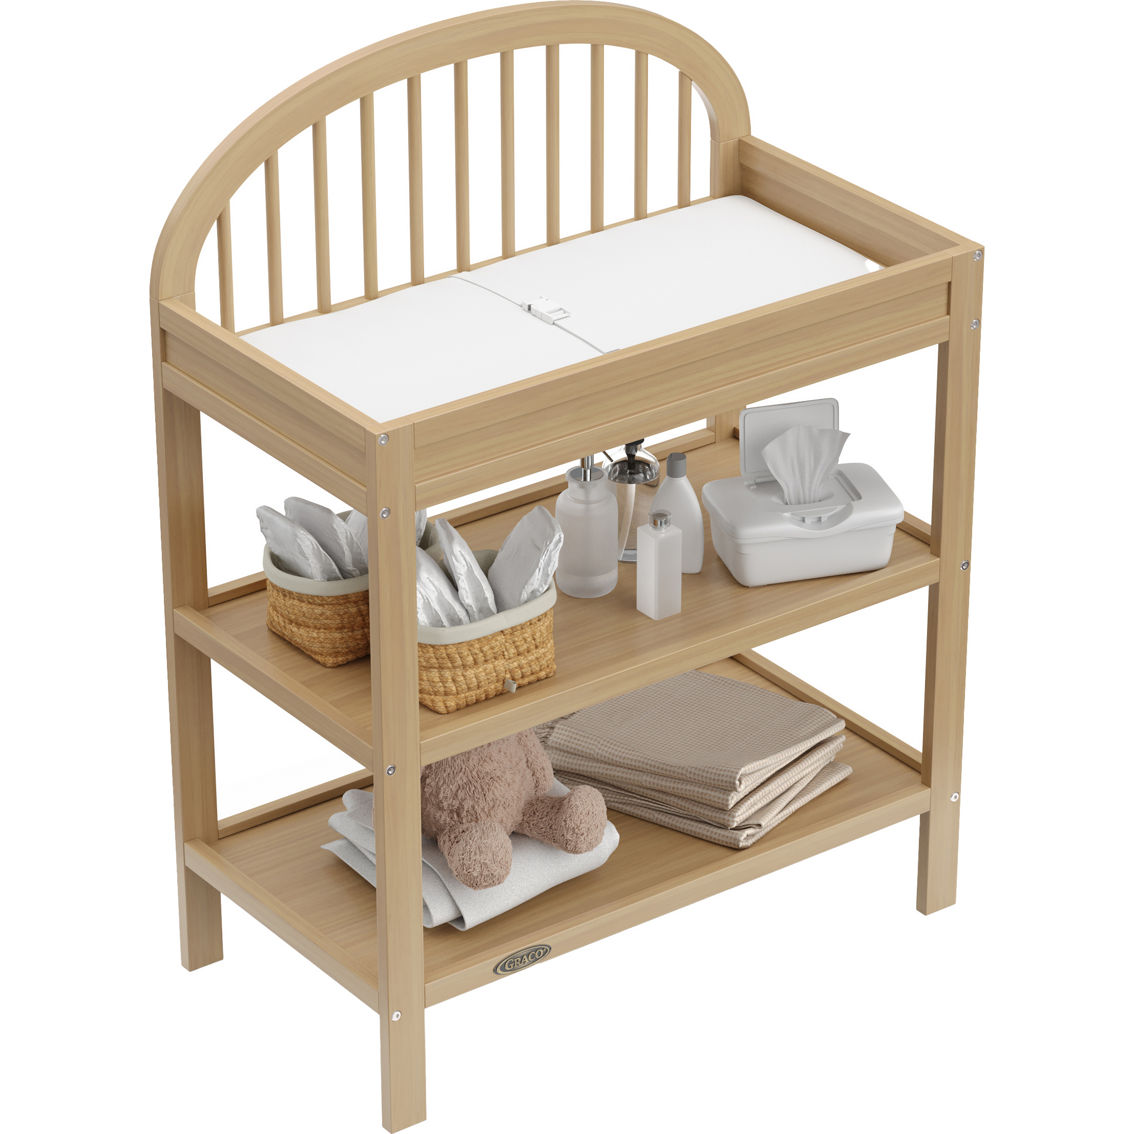 Graco Olivia Changing Table with Changing Pad - Image 2 of 8